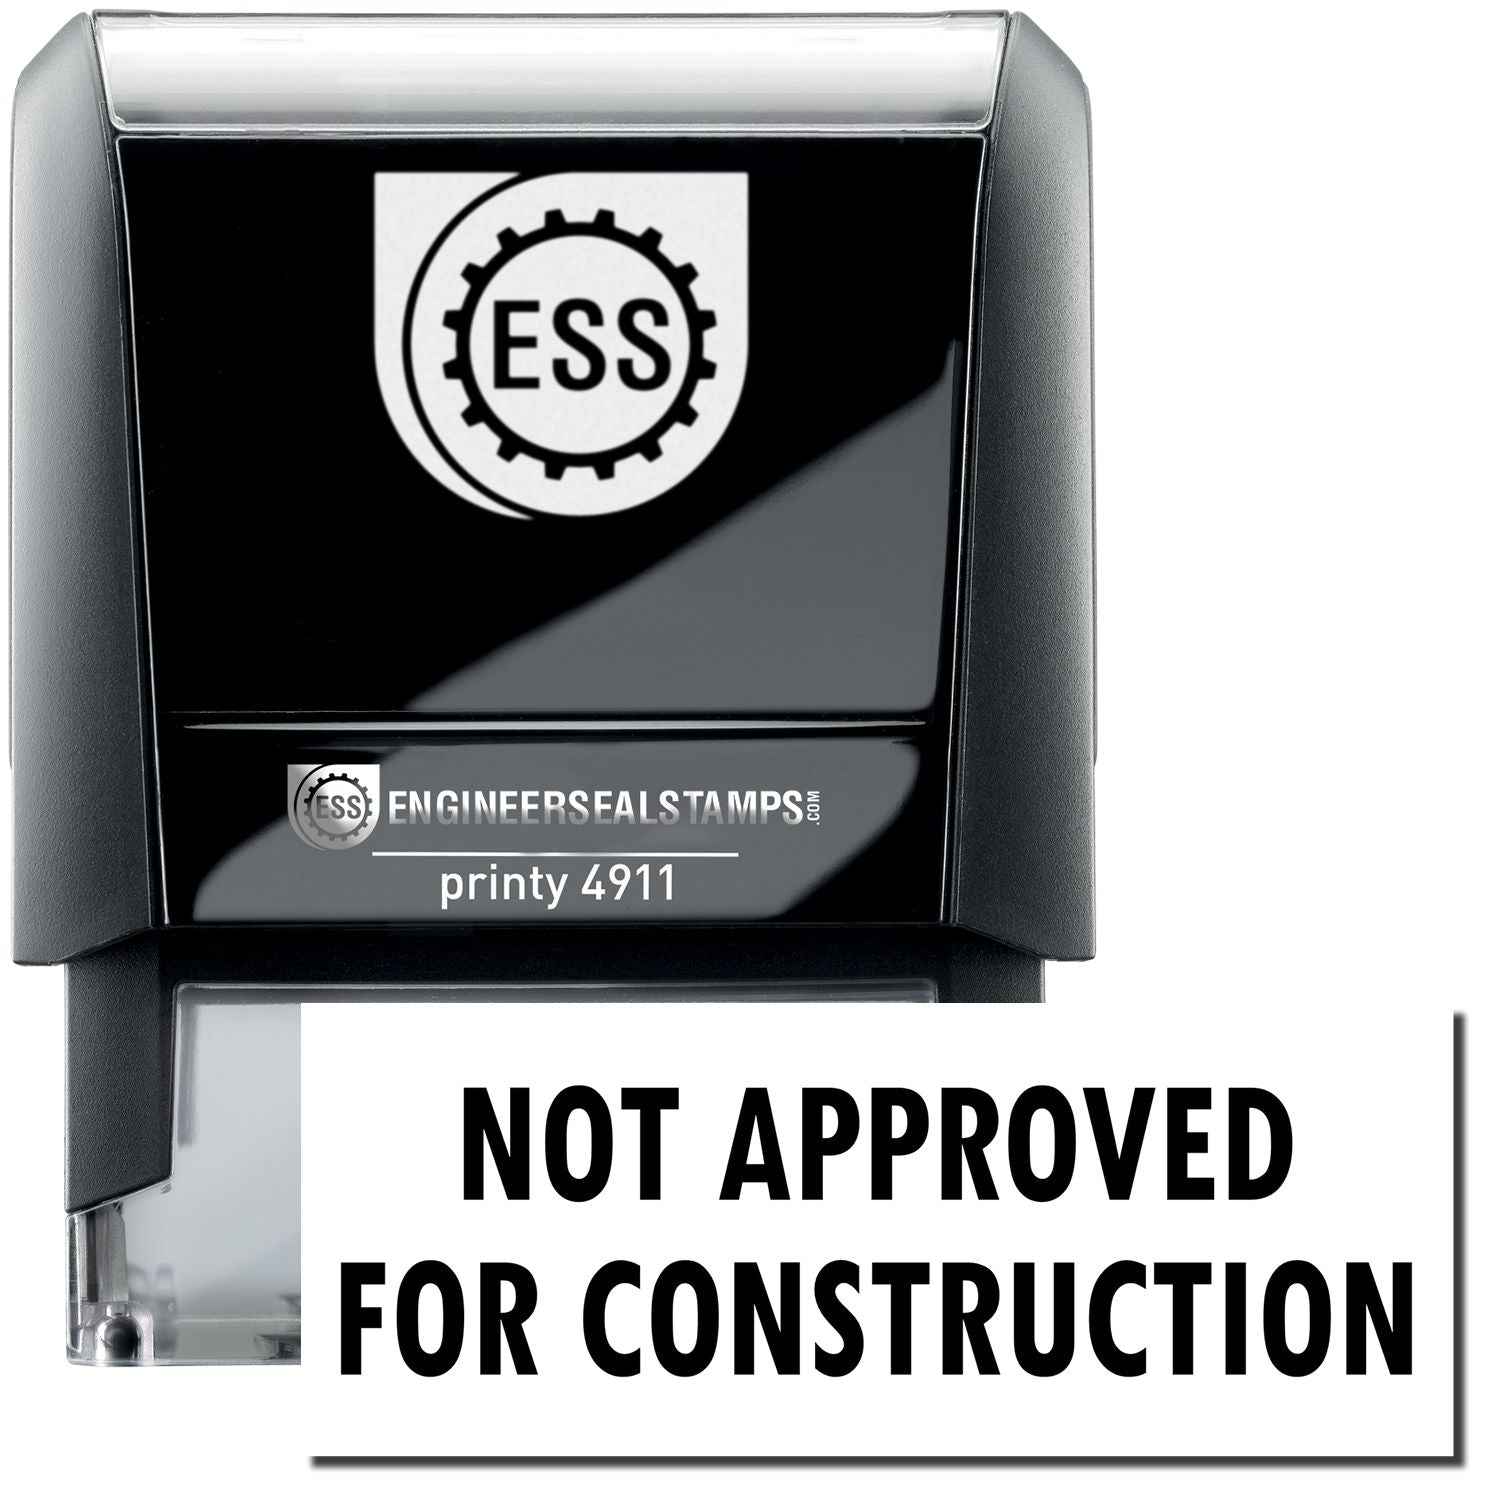 A self-inking stamp with a stamped image showing how the text "NOT APPROVED FOR CONSTRUCTION" is displayed after stamping.